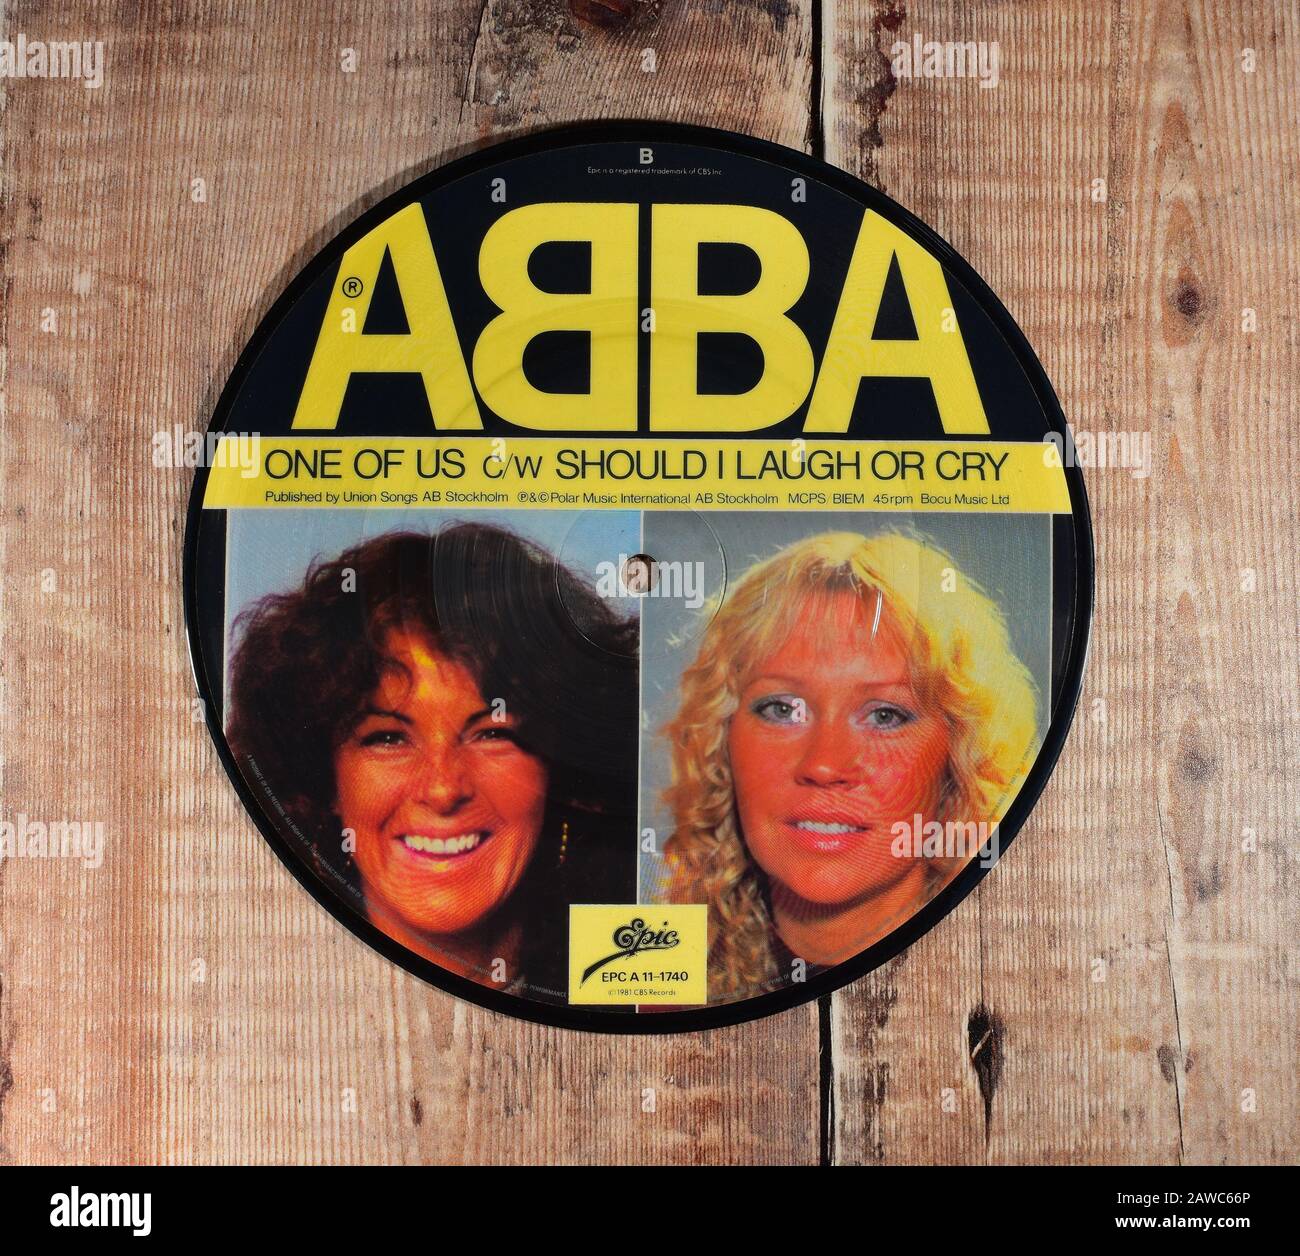 ABBA One of us - should I laugh or cry 7 inch single Stock Photo - Alamy